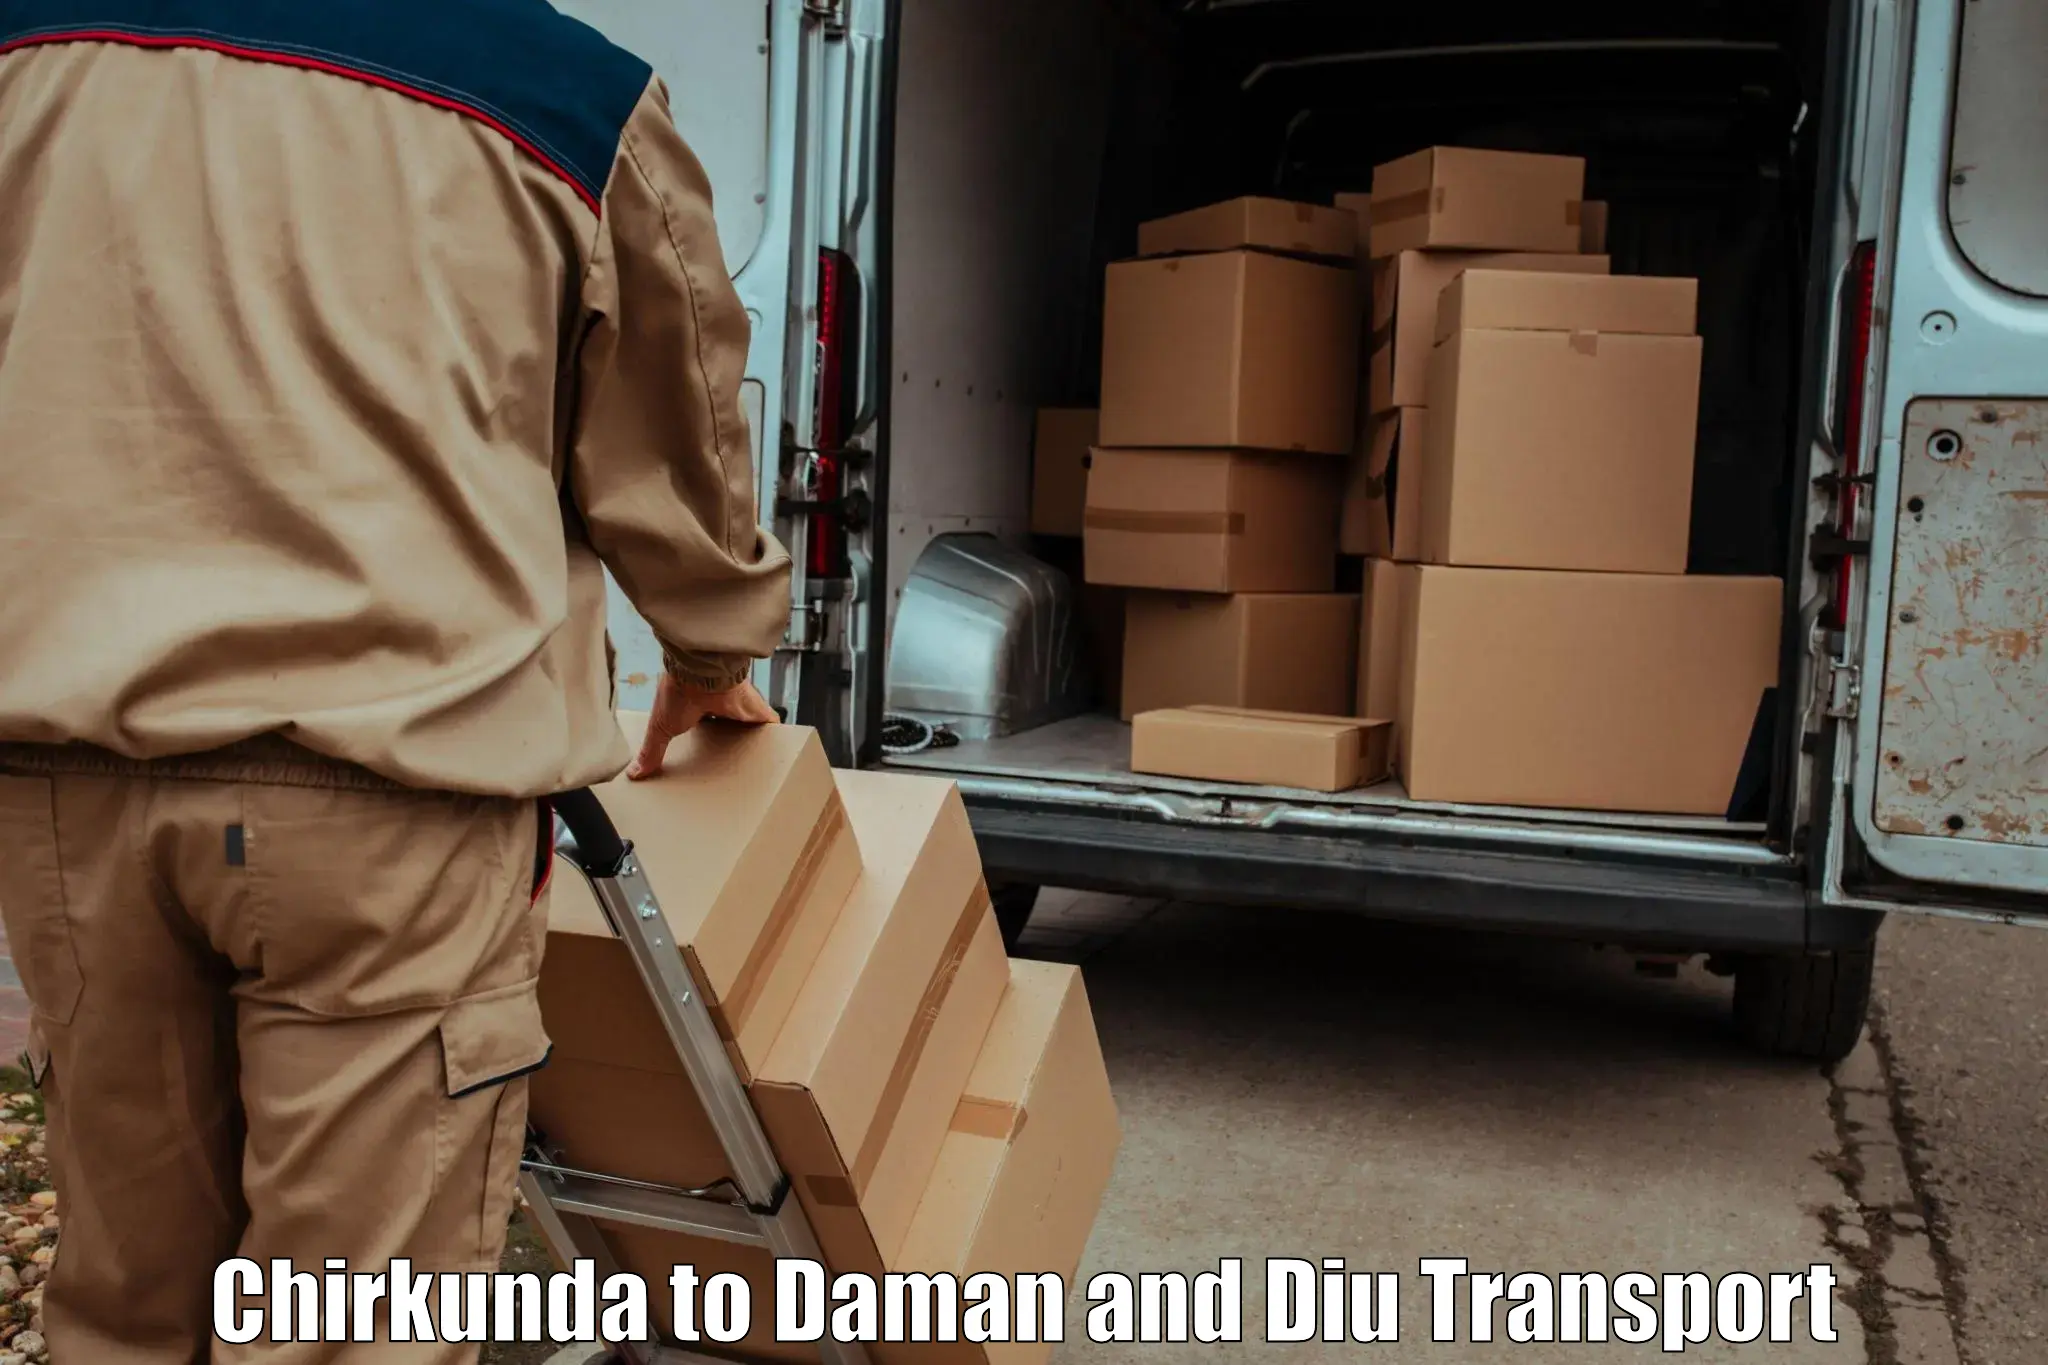 Transport shared services in Chirkunda to Diu